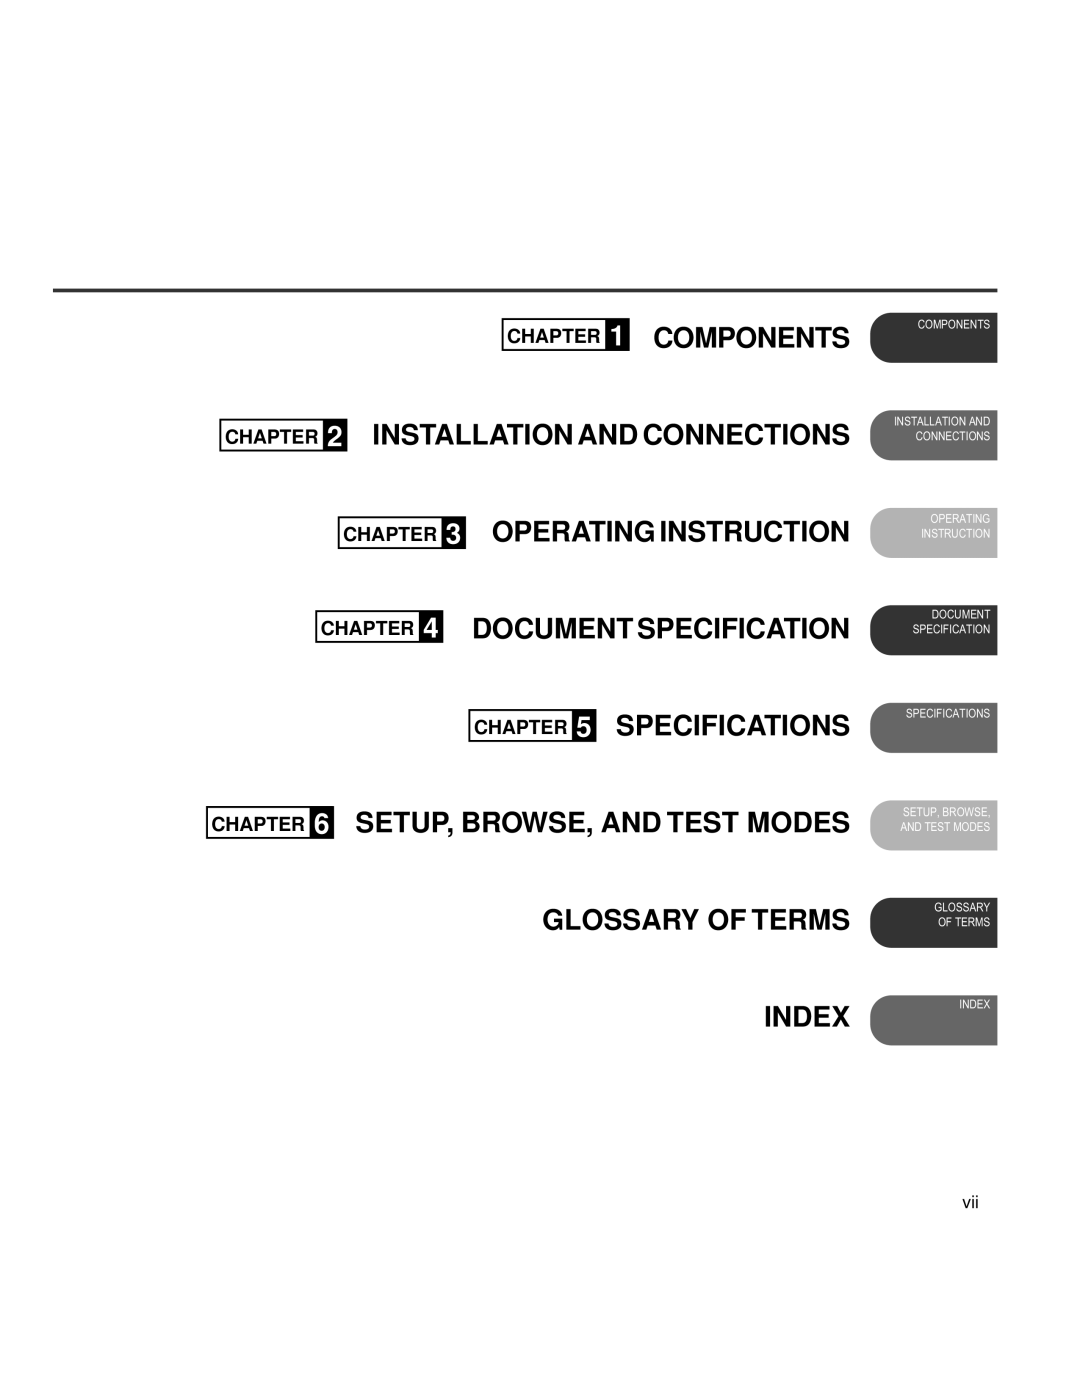 Fujitsu fi-4990C Components, Installation And Connections, Operating Instruction Document Specification, Chapter, Index 